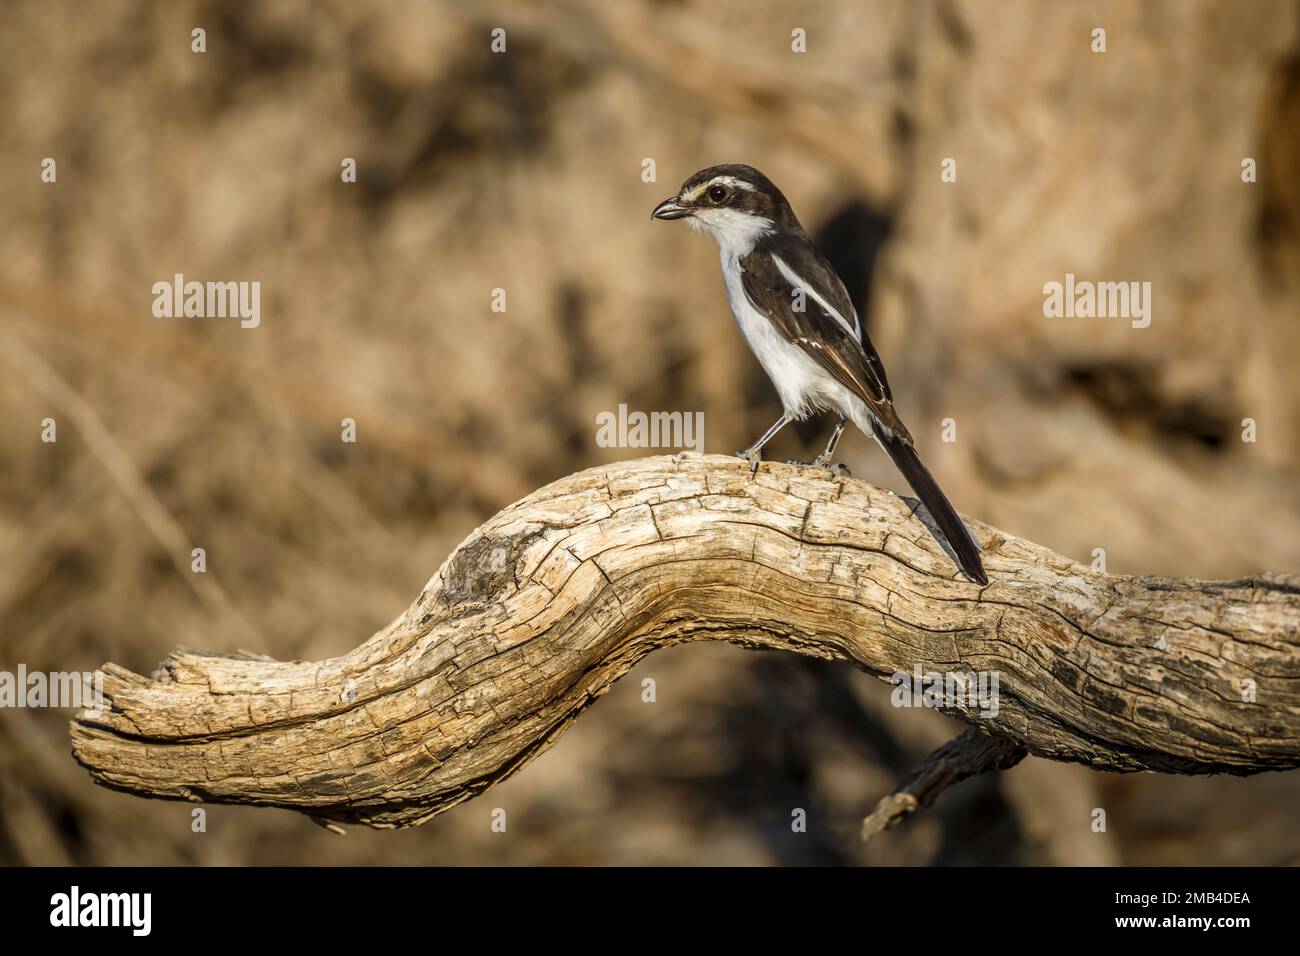 White browed Sparrow Weaver standing on a log side view in Kgalagadi transfrontier park, South Africa; specie Plocepasser mahali family of Ploceidae Stock Photo